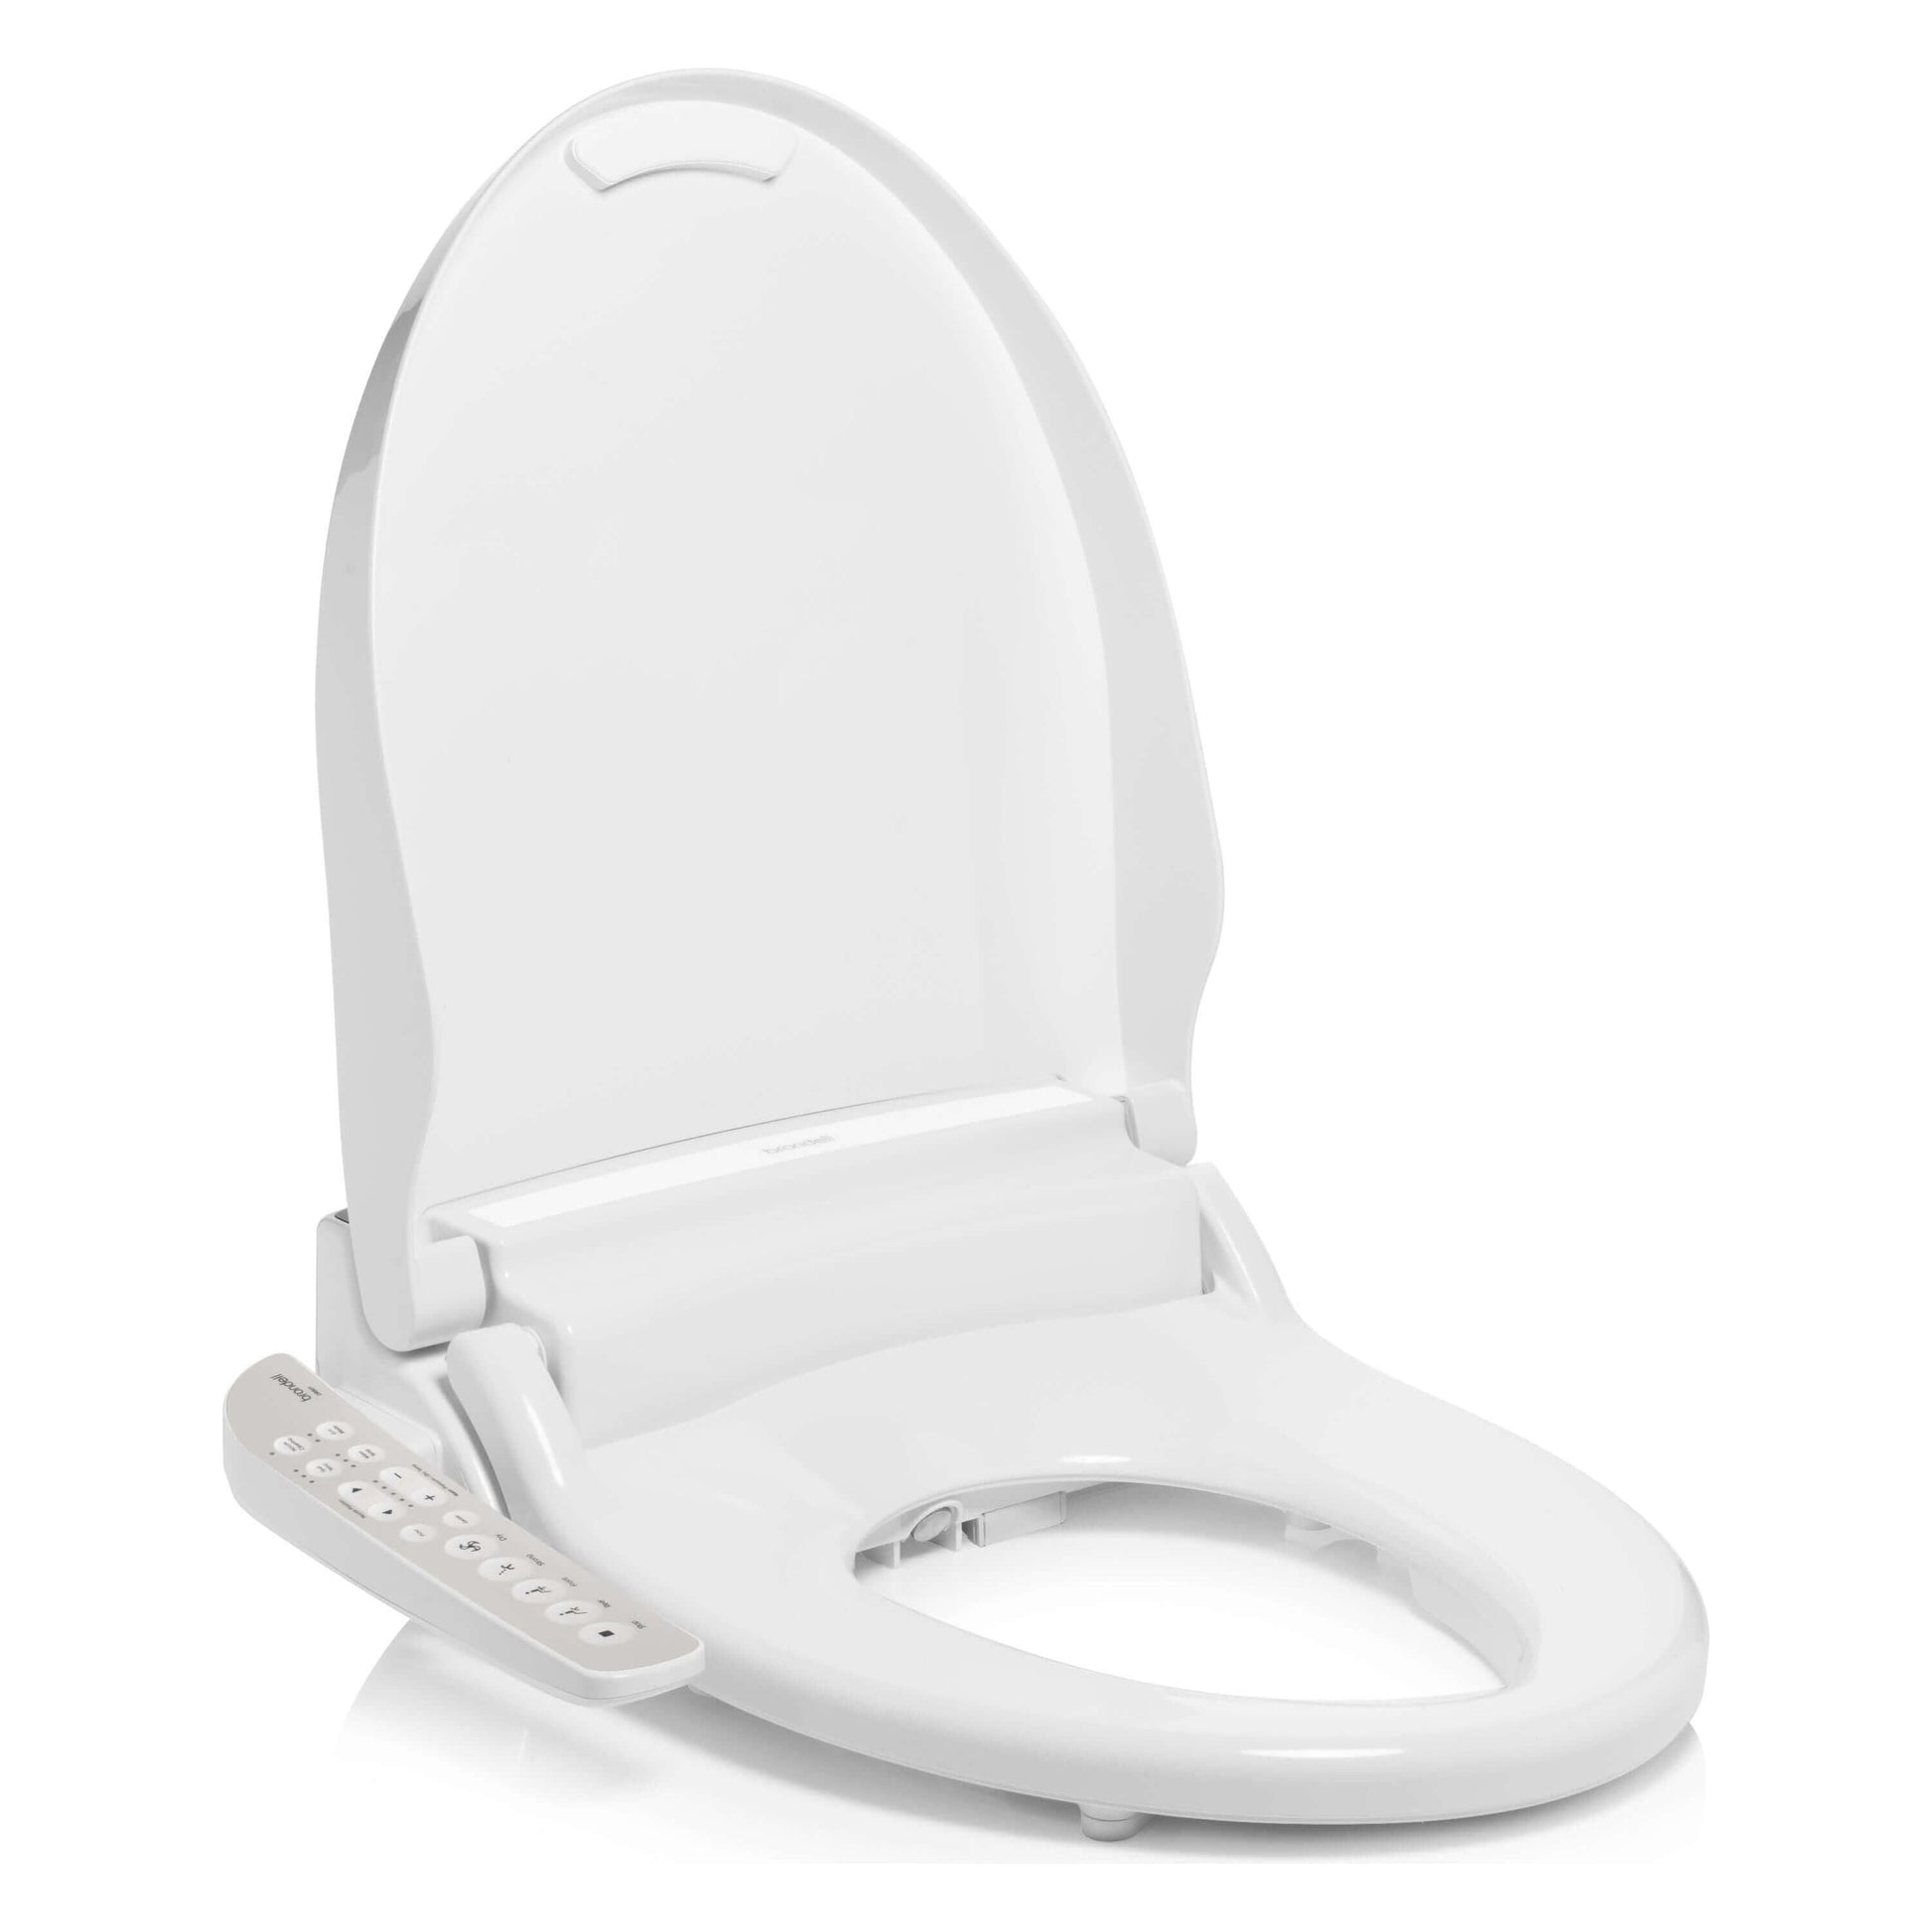 Swash Select DR801 Bidet Seat - side angled view with lid open